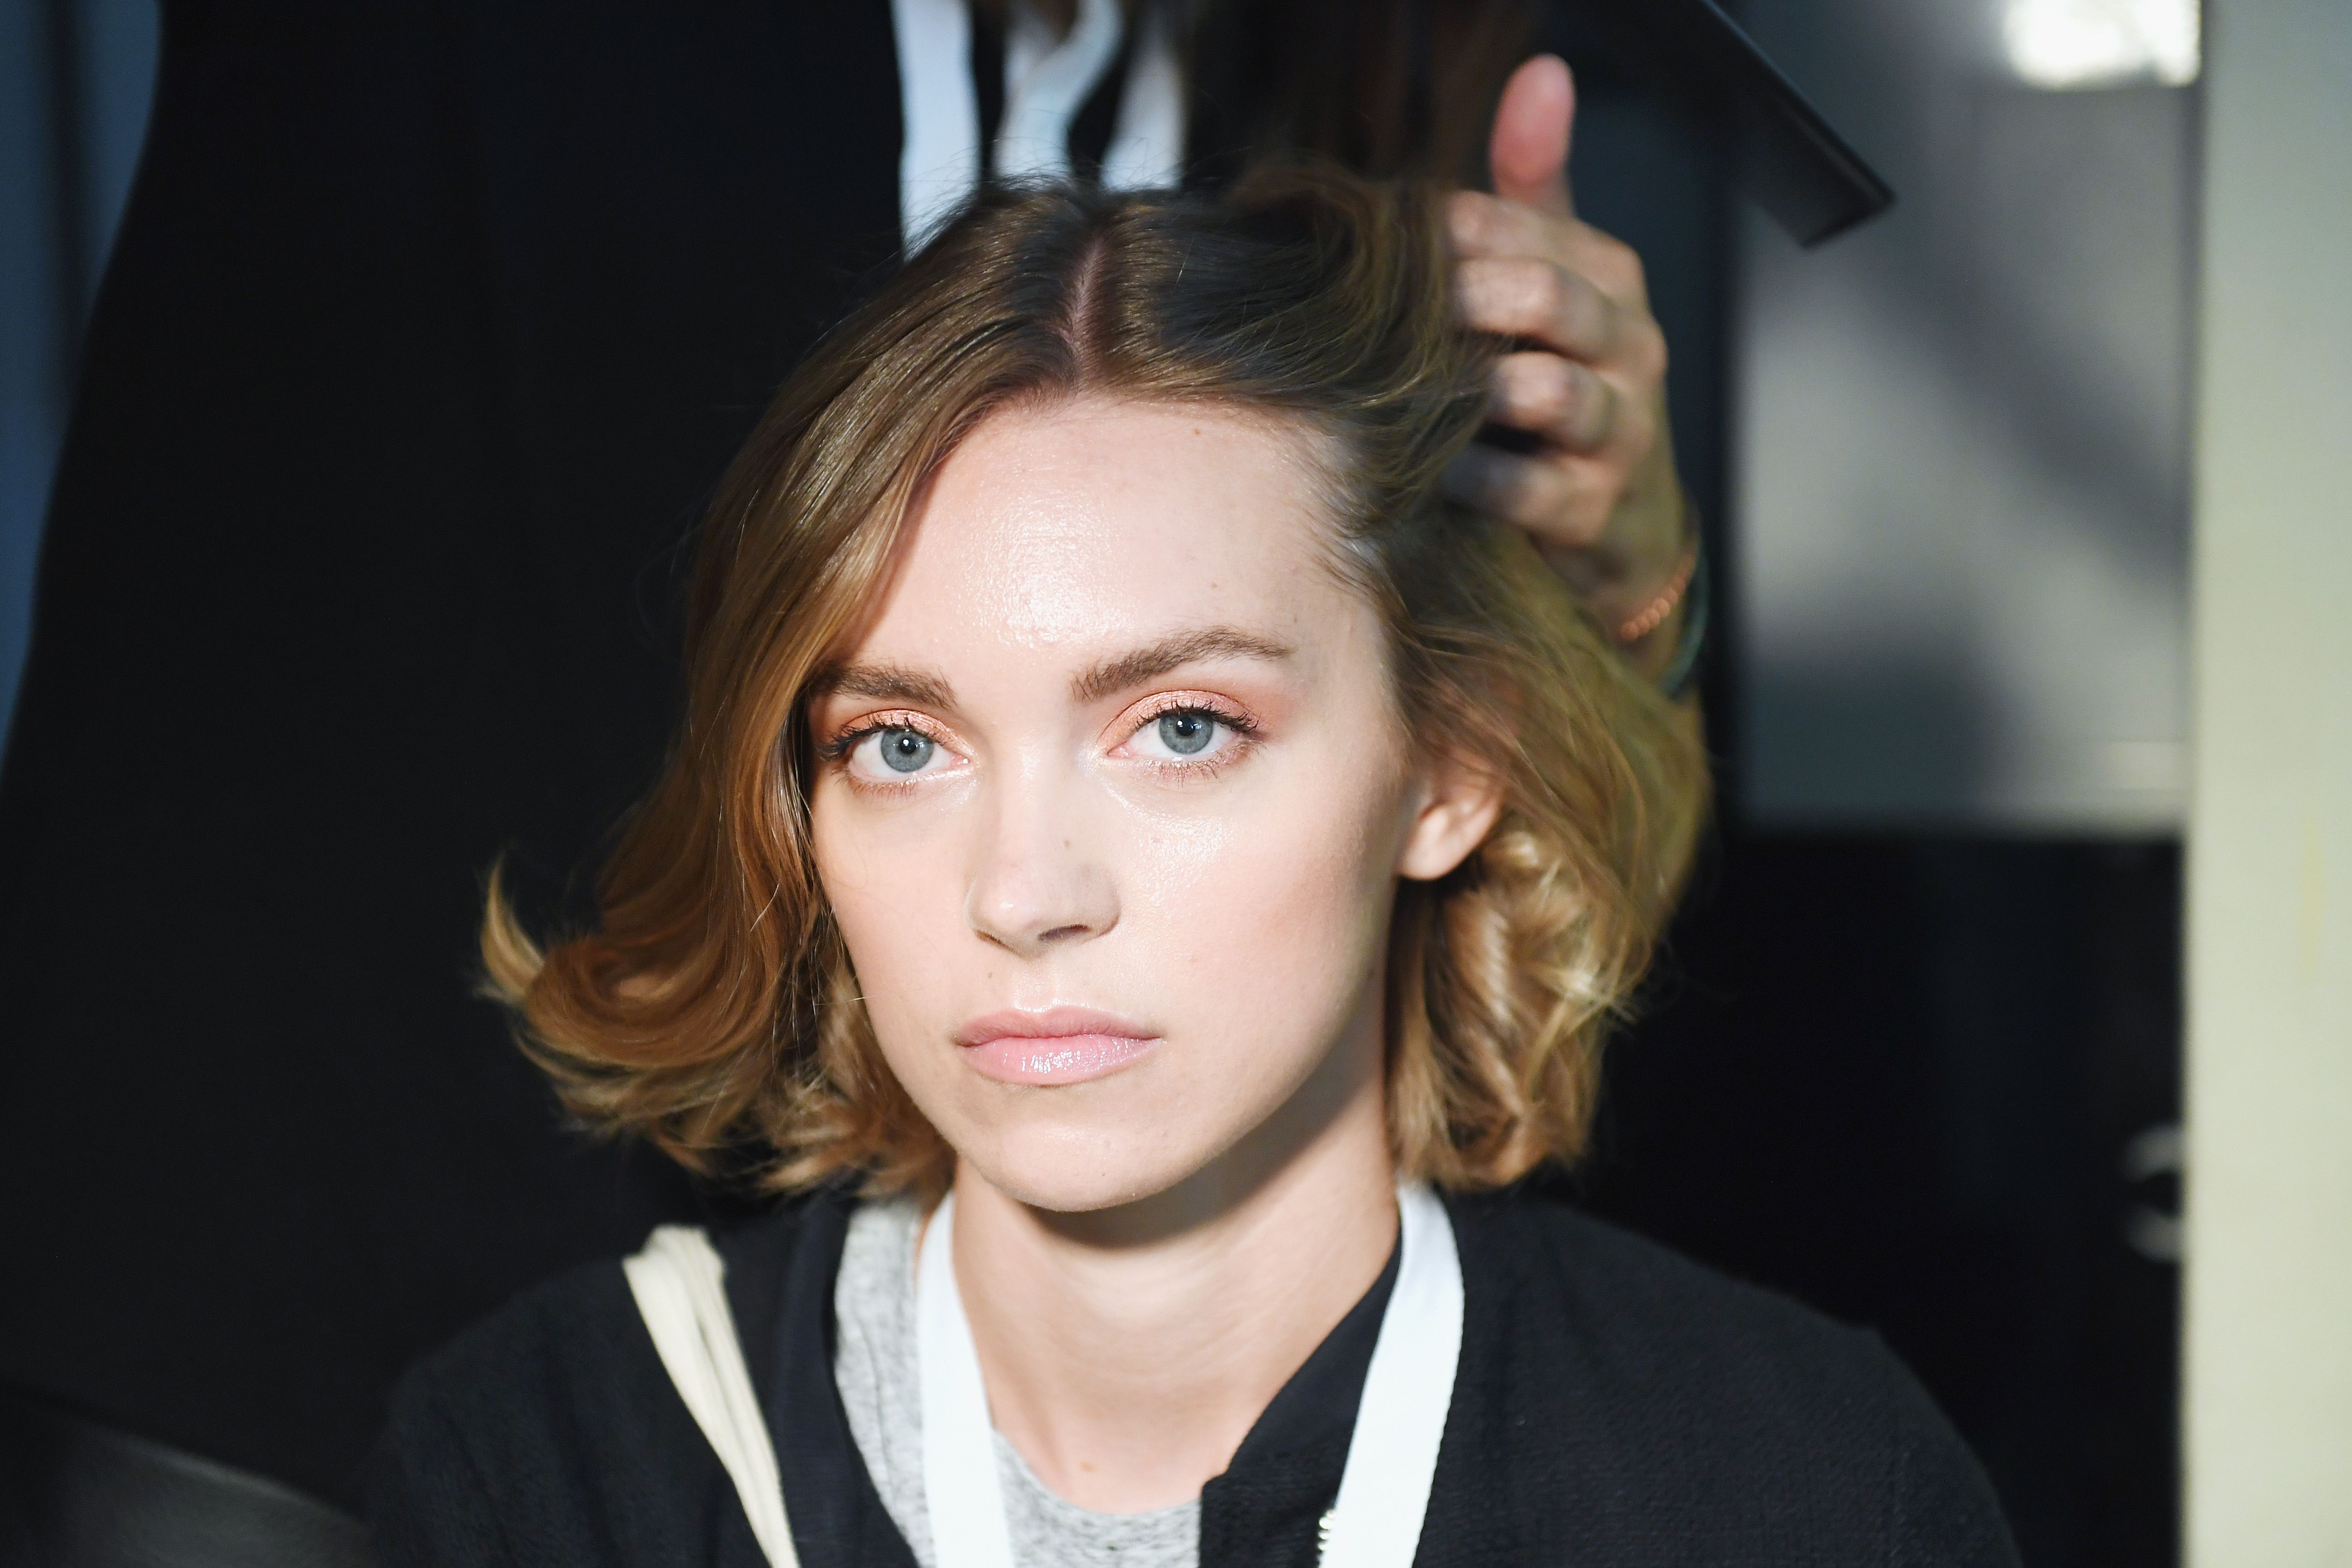 The Trendiest Haircuts And Styles For Thin Hair To Try Now | Hair.com By  L'Oréal